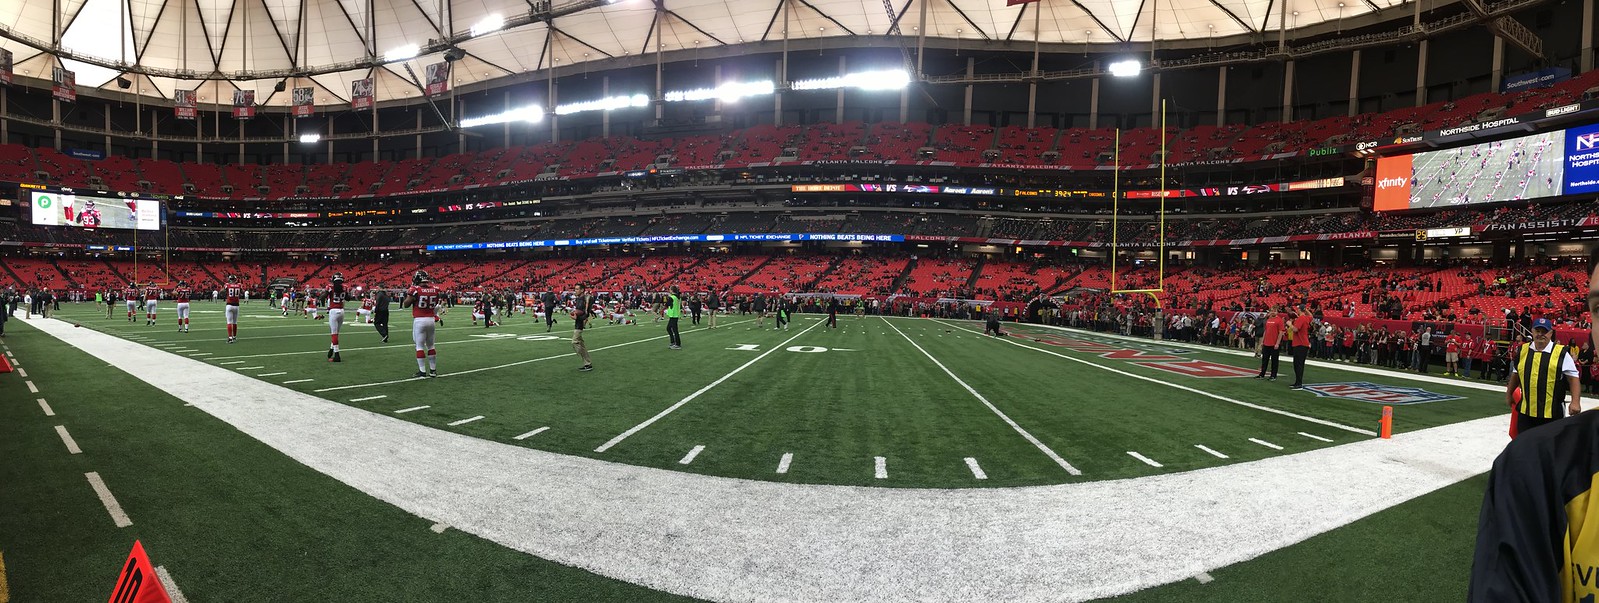 2016_T4T_ATL Falcons Game Day 23